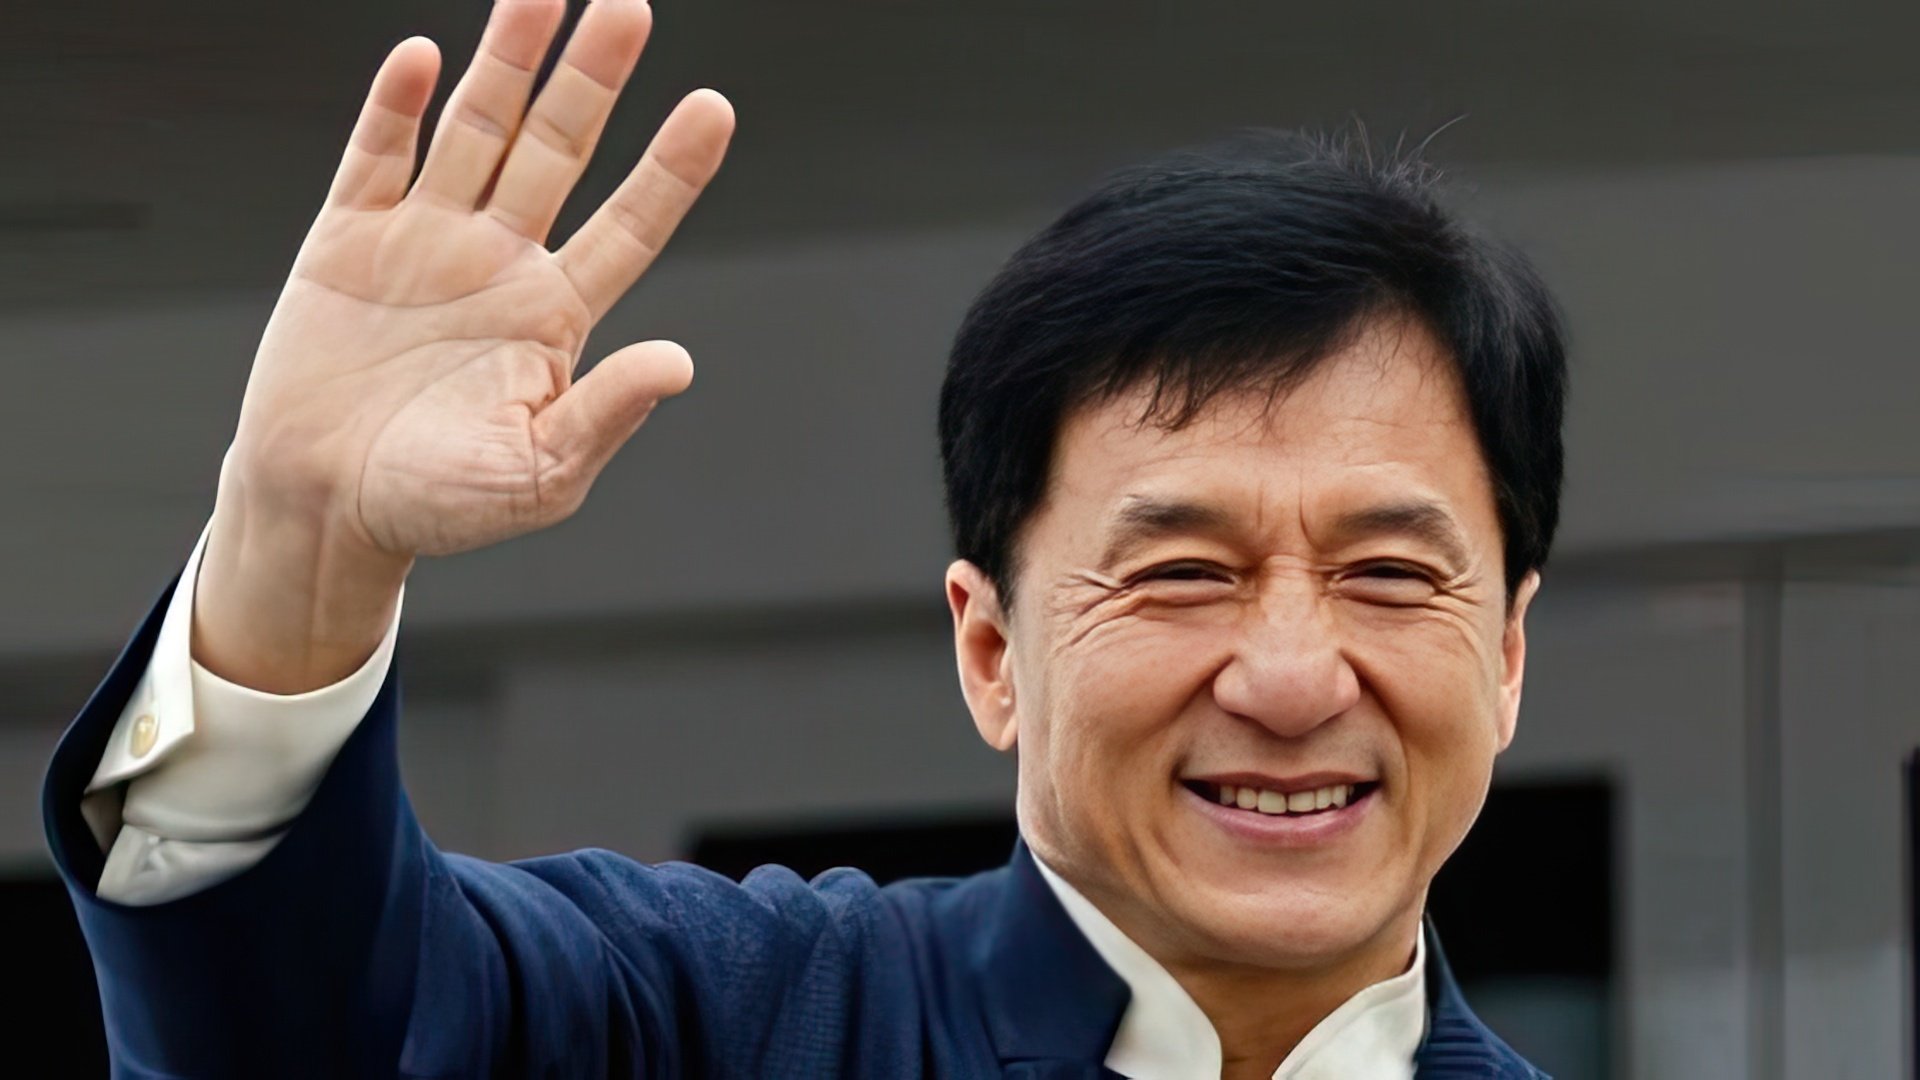 Jackie Chan is still to proceed his career